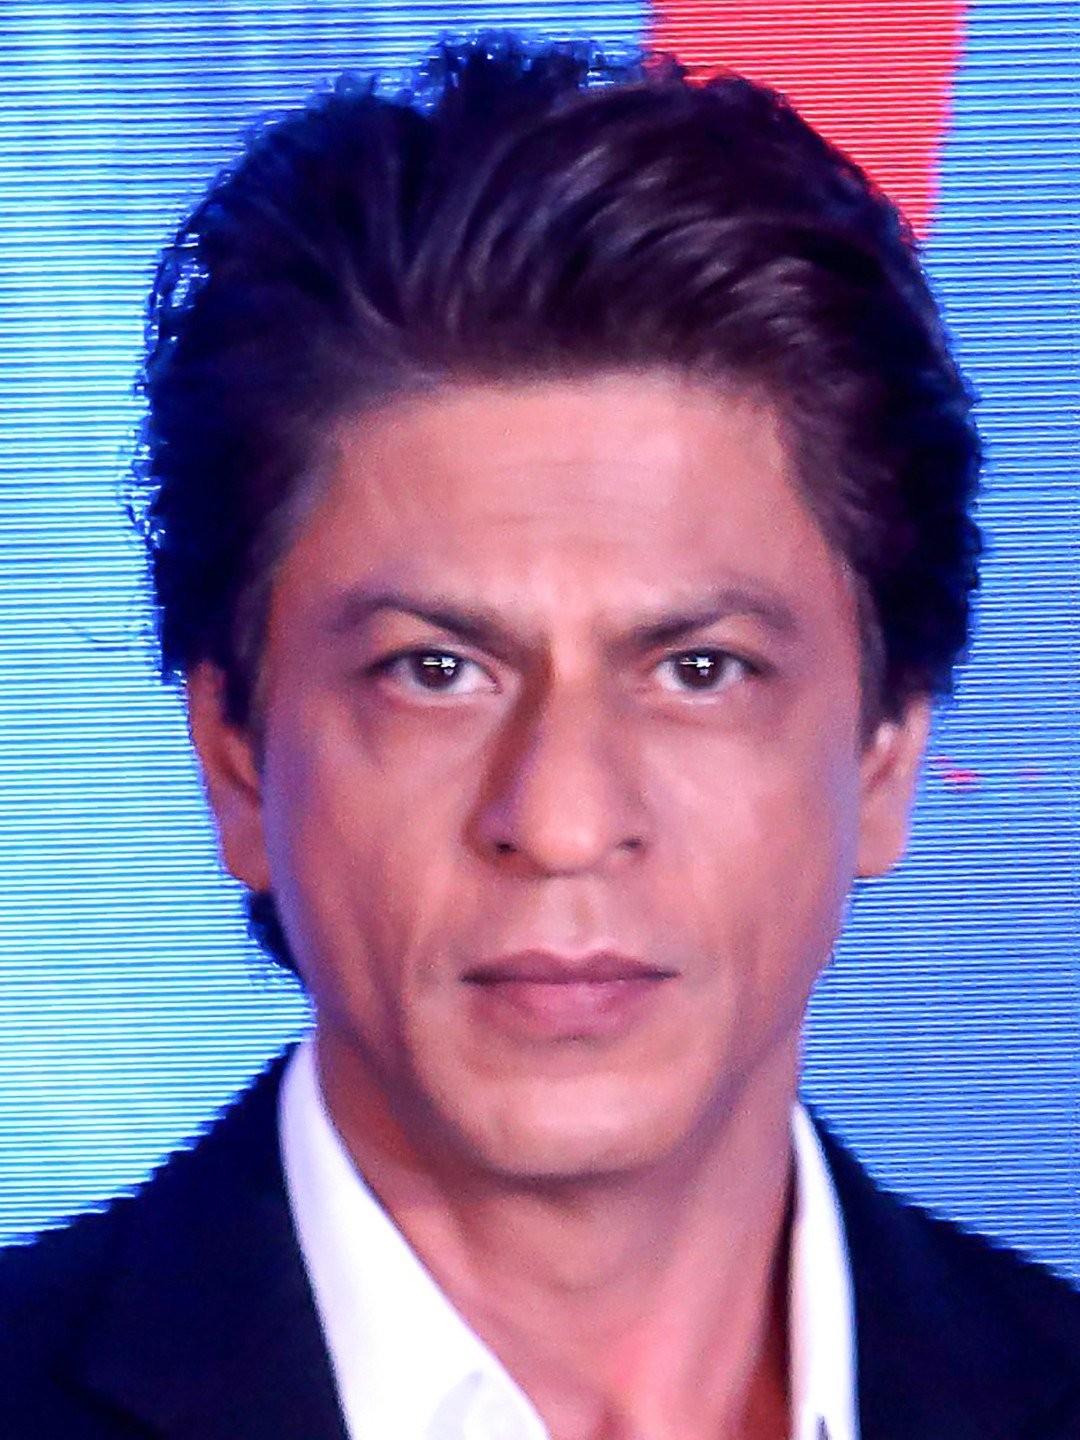 Old Video Of Public Reaction To Shah Rukh Khan's Movies Peddled As